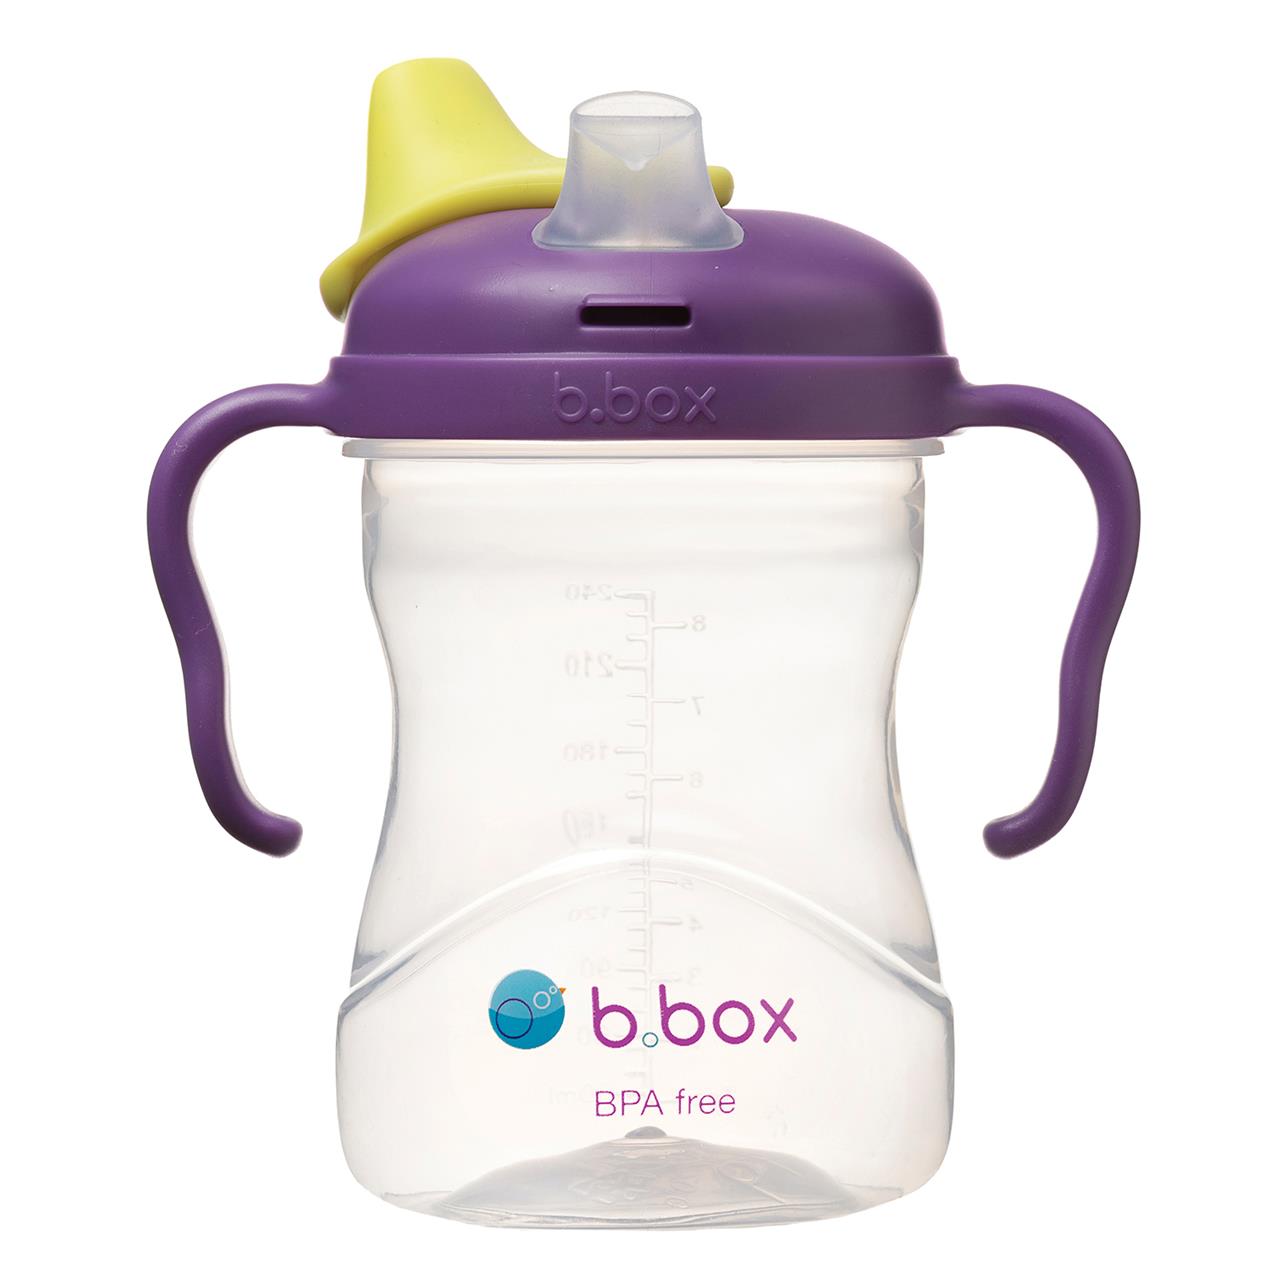 b.box Spout Cup in Grape available at Bear & Moo